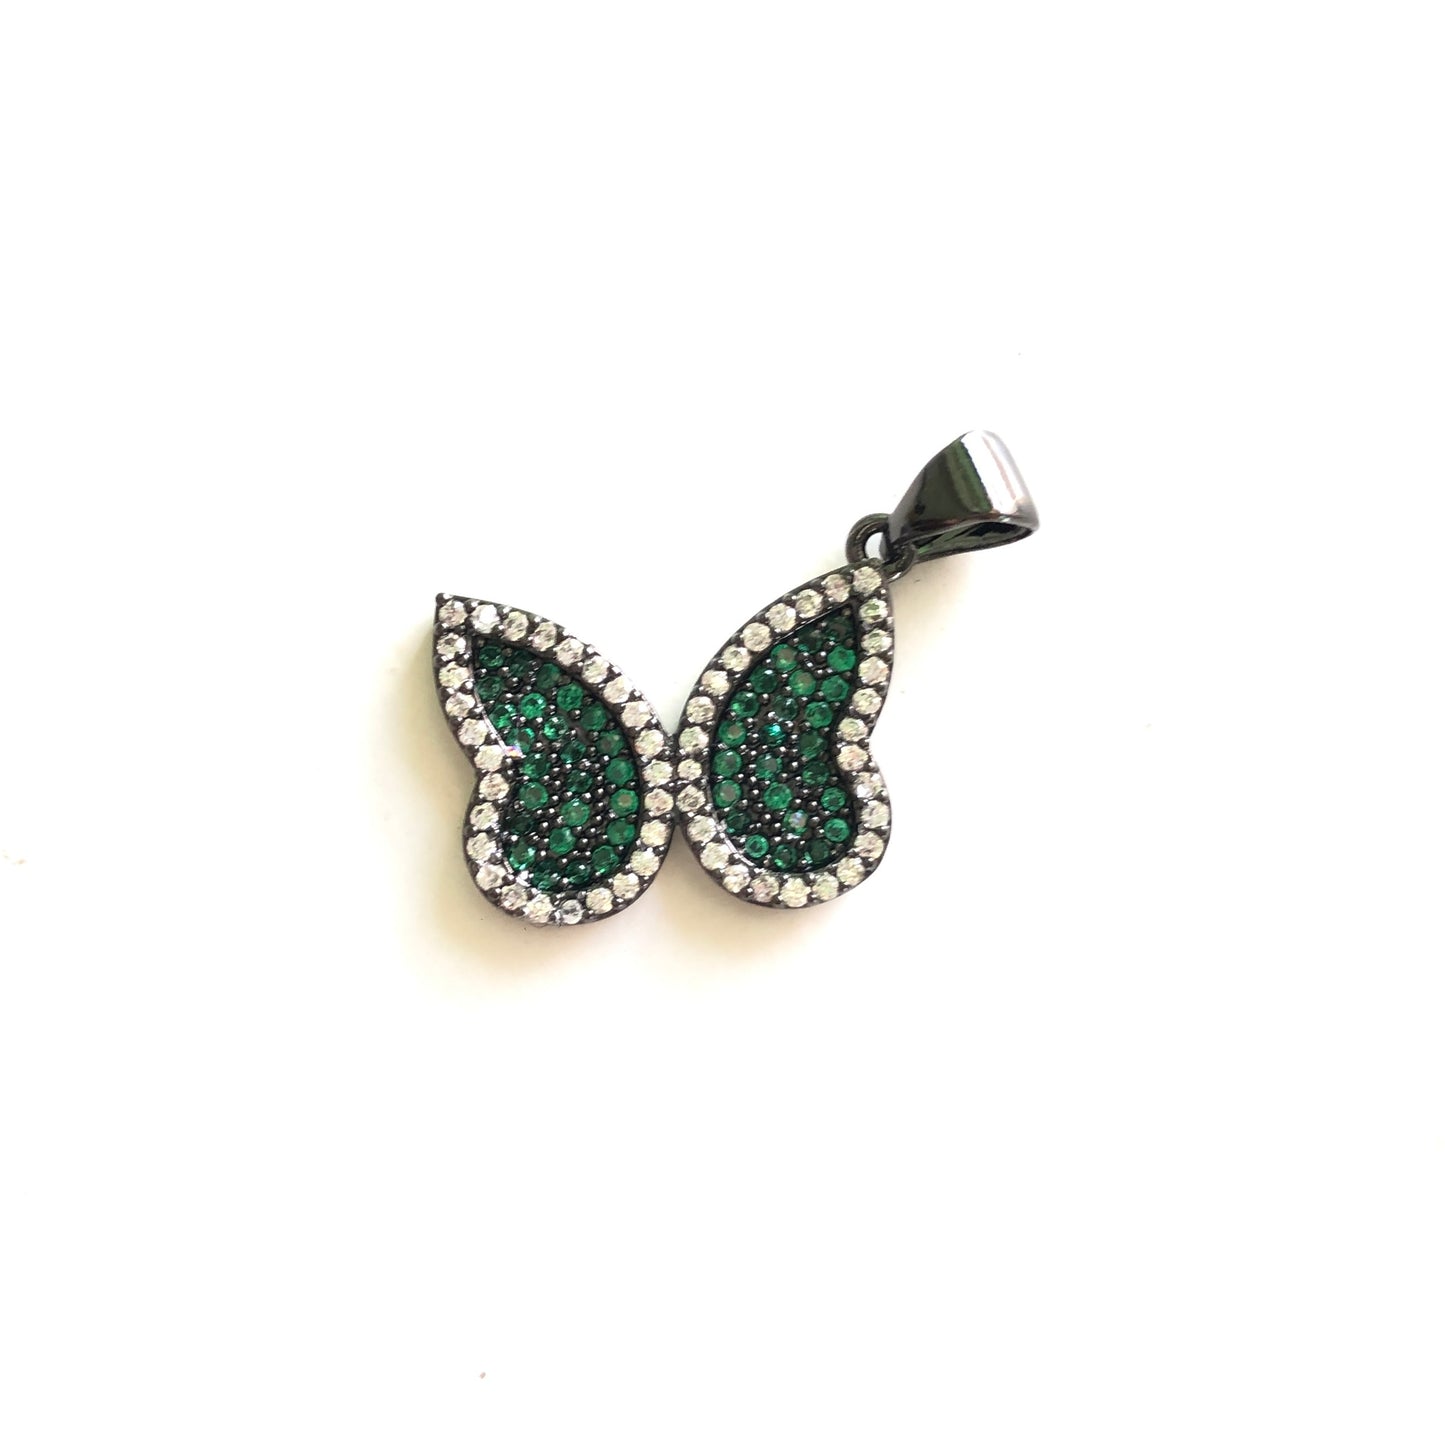 5pcs/lot 21*15mm Colorful CZ Paved Butterfly Charms Green on Black CZ Paved Charms Butterflies Charms Beads Beyond